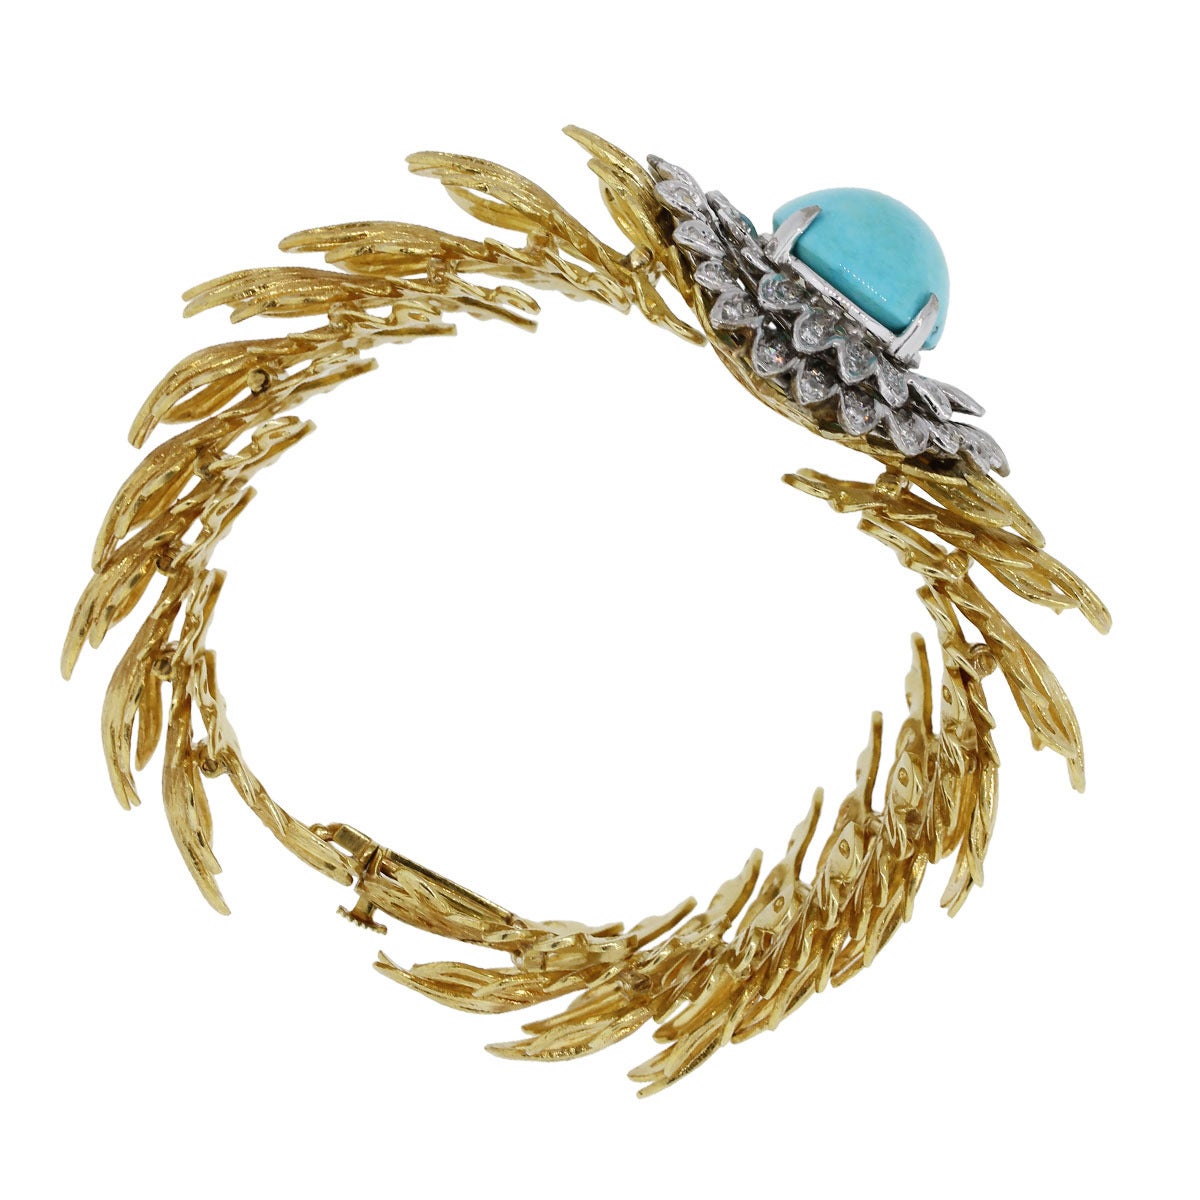 Brand: Erwin Pearl
Style: Bangle
Metal: 18K Yellow and White Gold
Gemstone Details: Oval shape cabochon Turquoise gemstone measuring approximately 21.70mm x 16.60mm
Diamond Details: Approximately 3ctw of Round Brilliant Diamonds. Diamonds are G